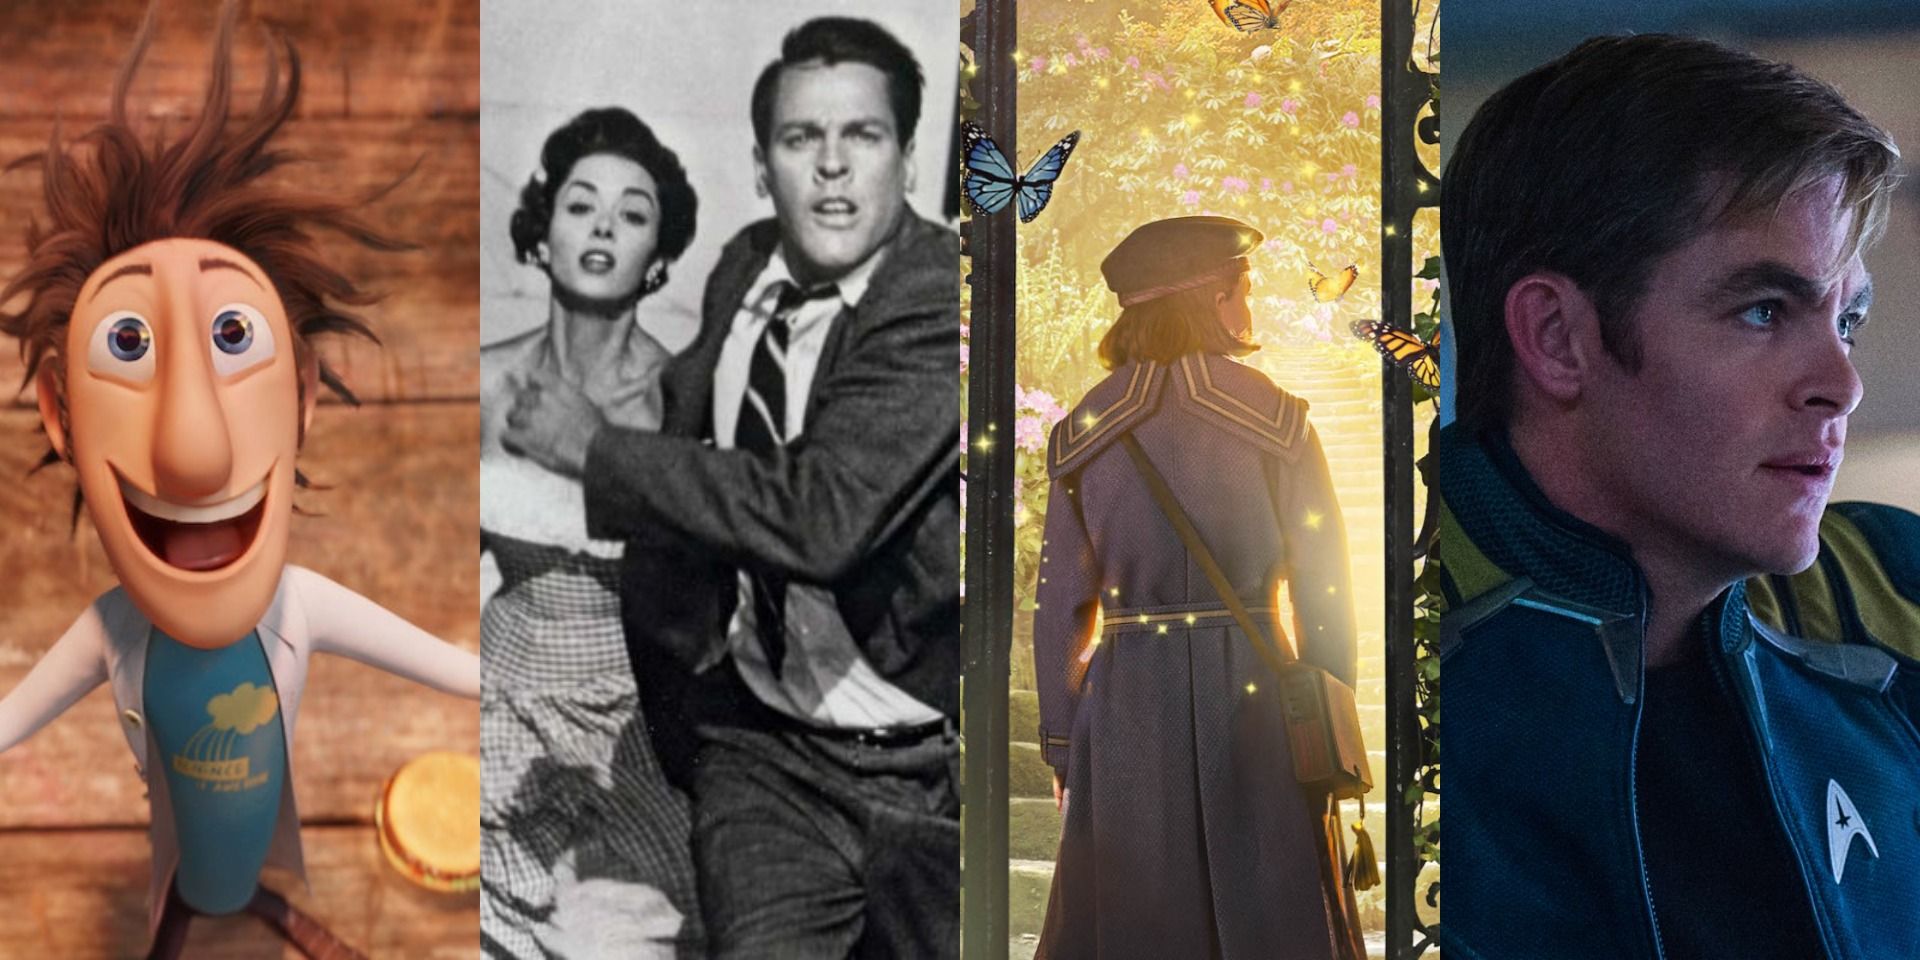 Scenes from Cloudy With a Chance of Meatballs, Invasion of the Body Snatchers (1956). The Secret Garden (2020), and Star Trek Beyond.